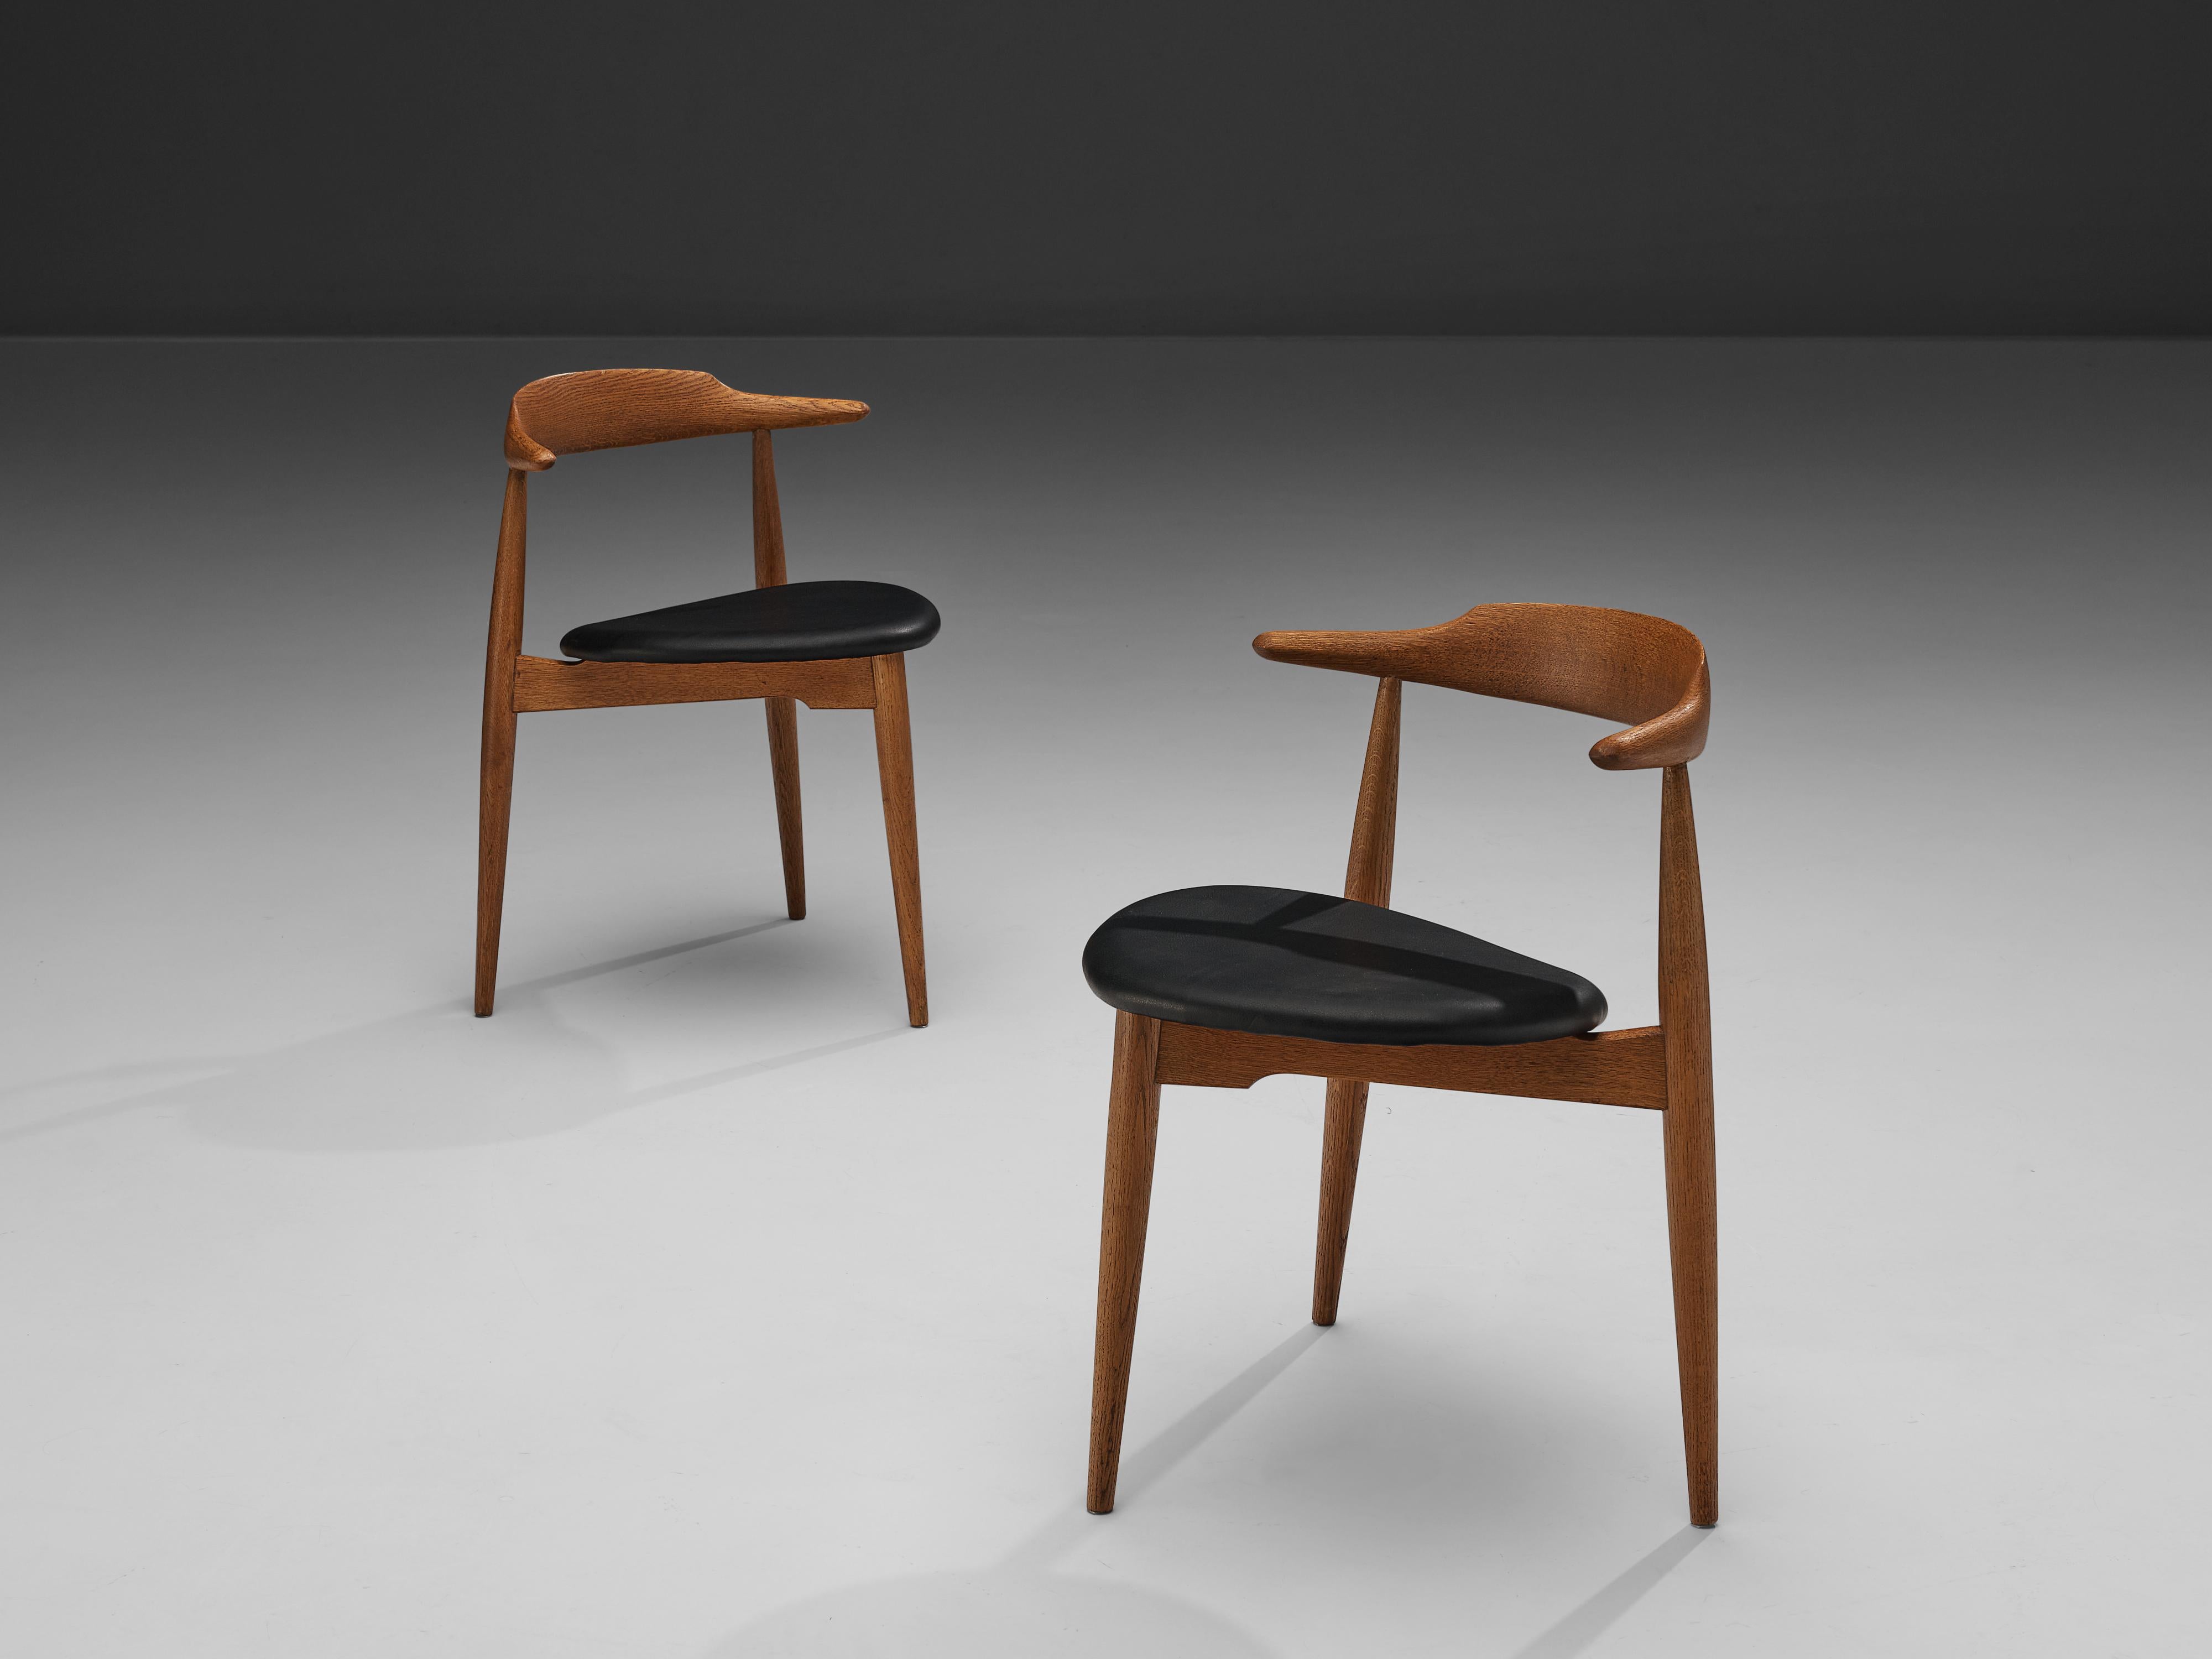 Hans Wegner for Fritz Hansen, ‘Heart’ dining chairs model ‘4103’, oak, leather, Denmark, designed in 1953

This pair of dining chairs are designed to take up as little space as possible whilst at the same time having a simplistic, natural and